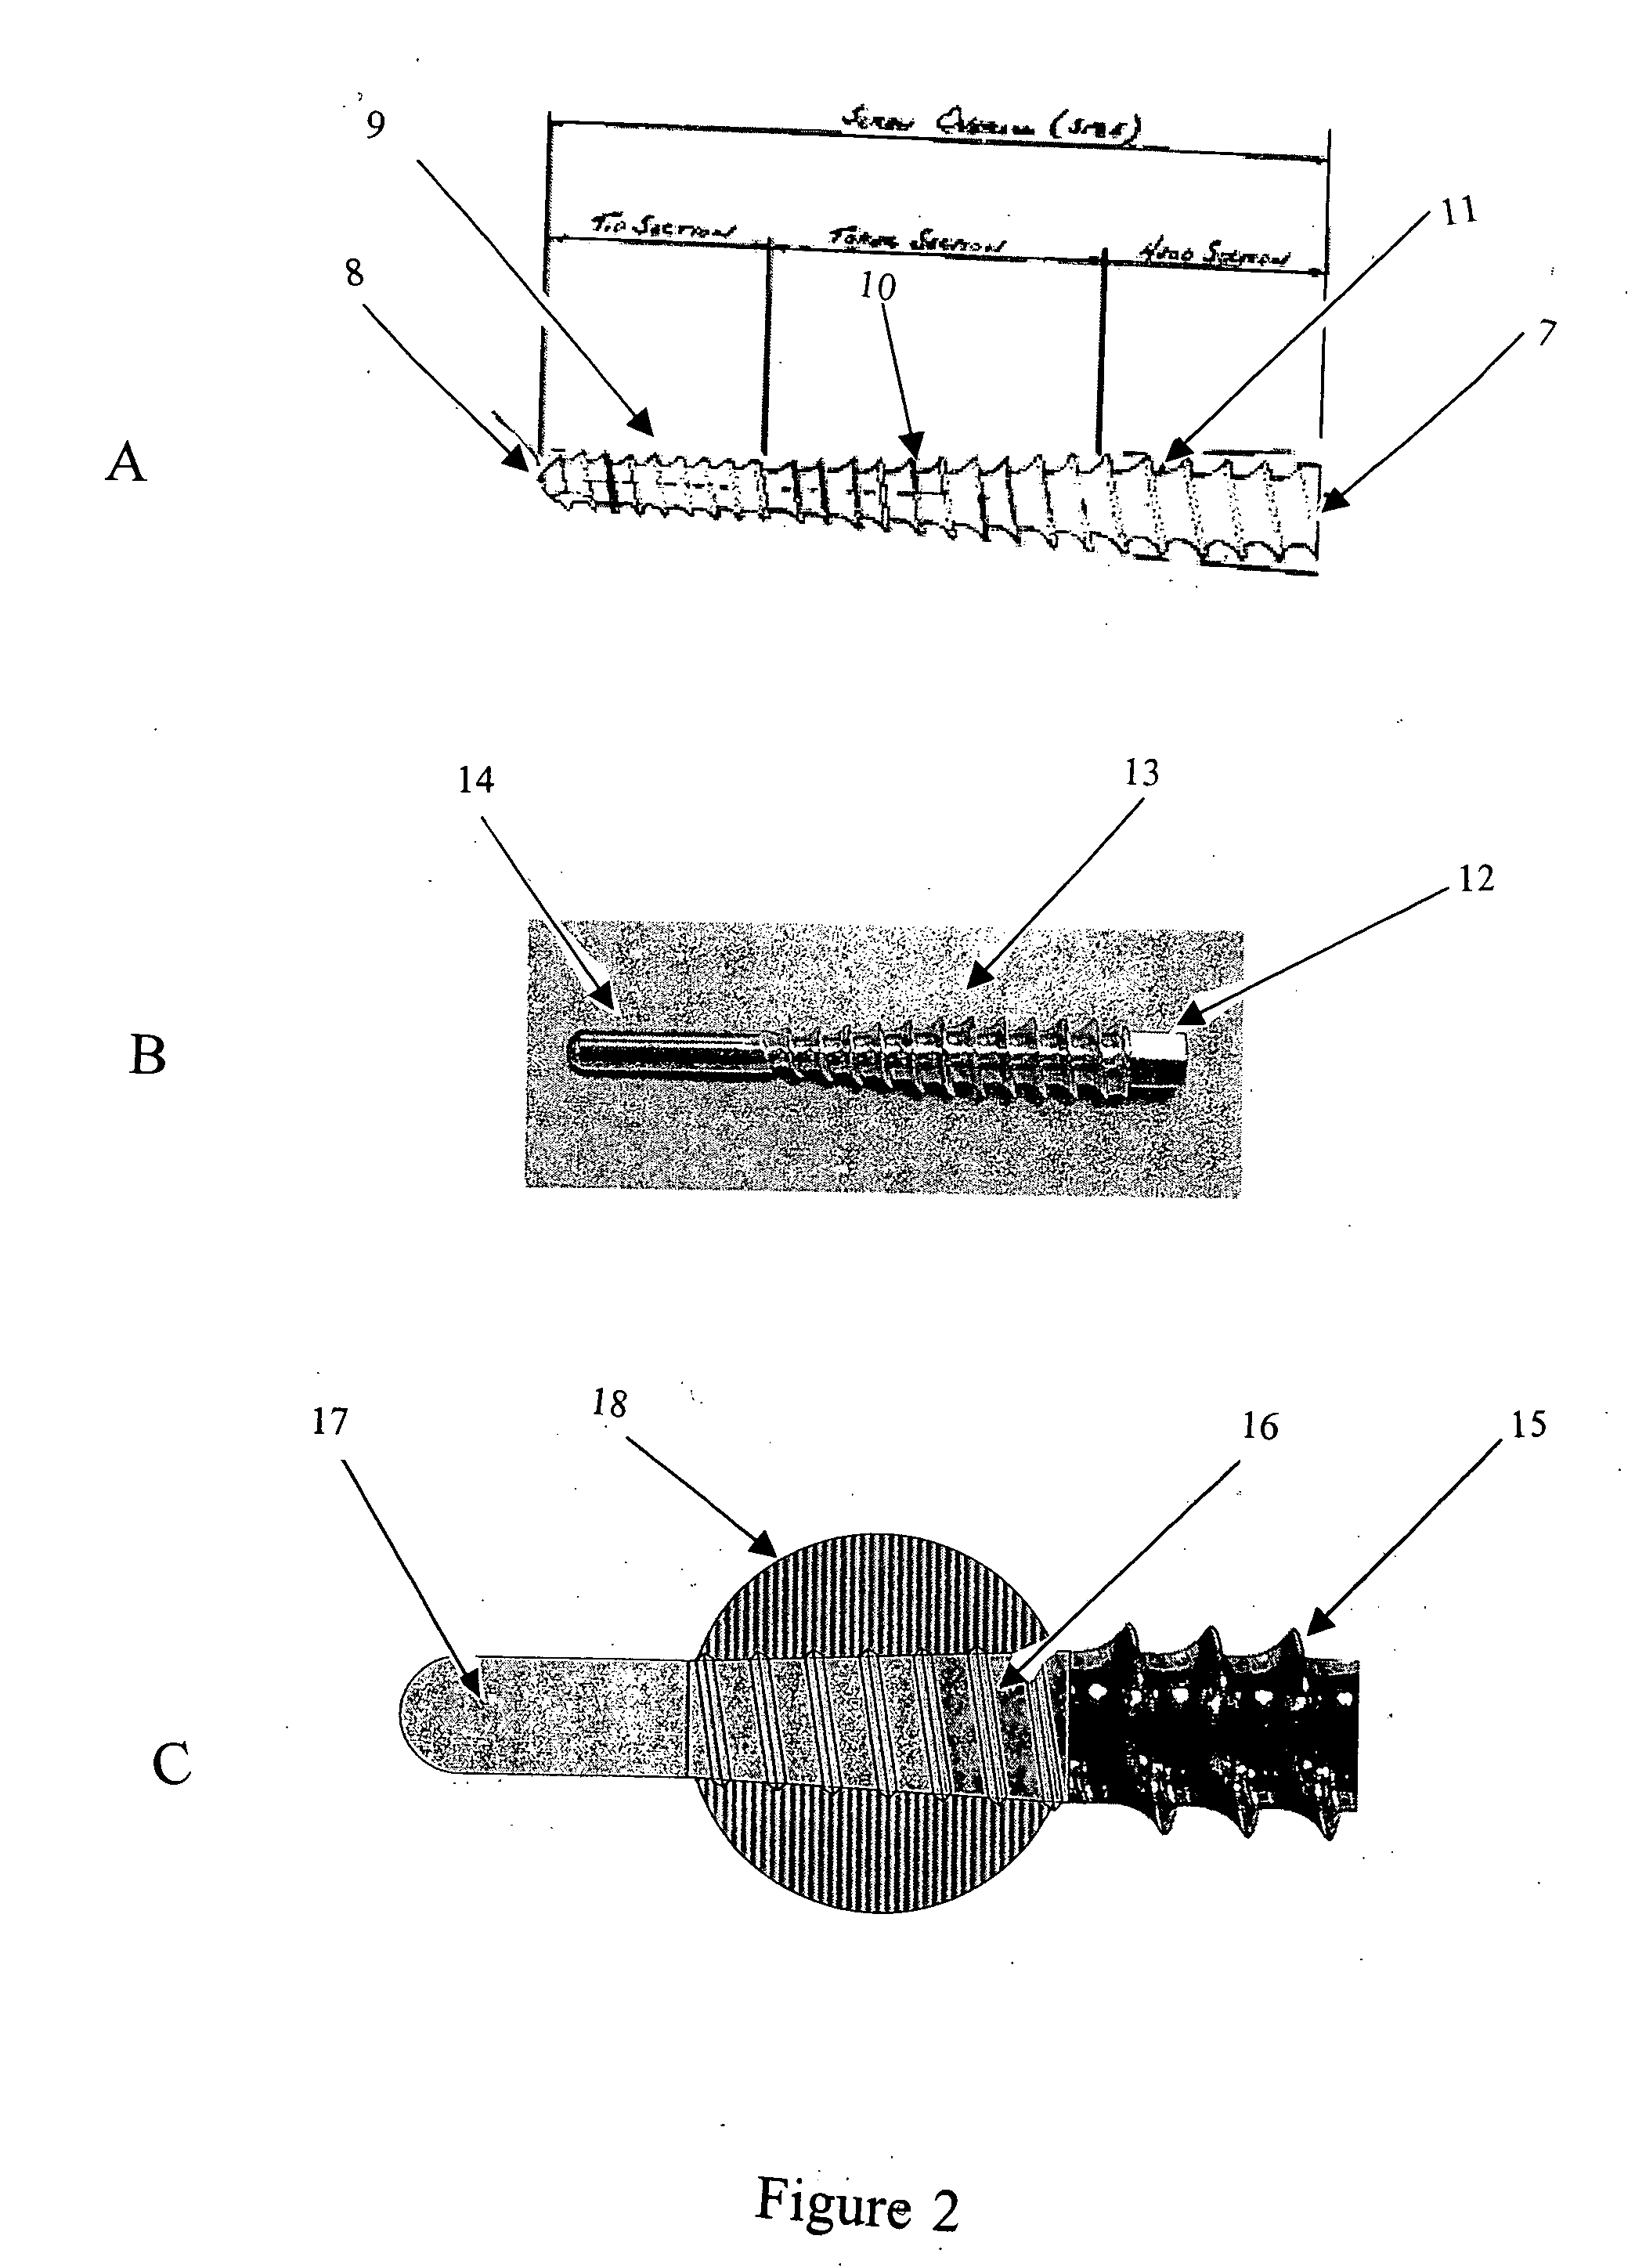 Devices and methods for interlocking surgical screws and nails